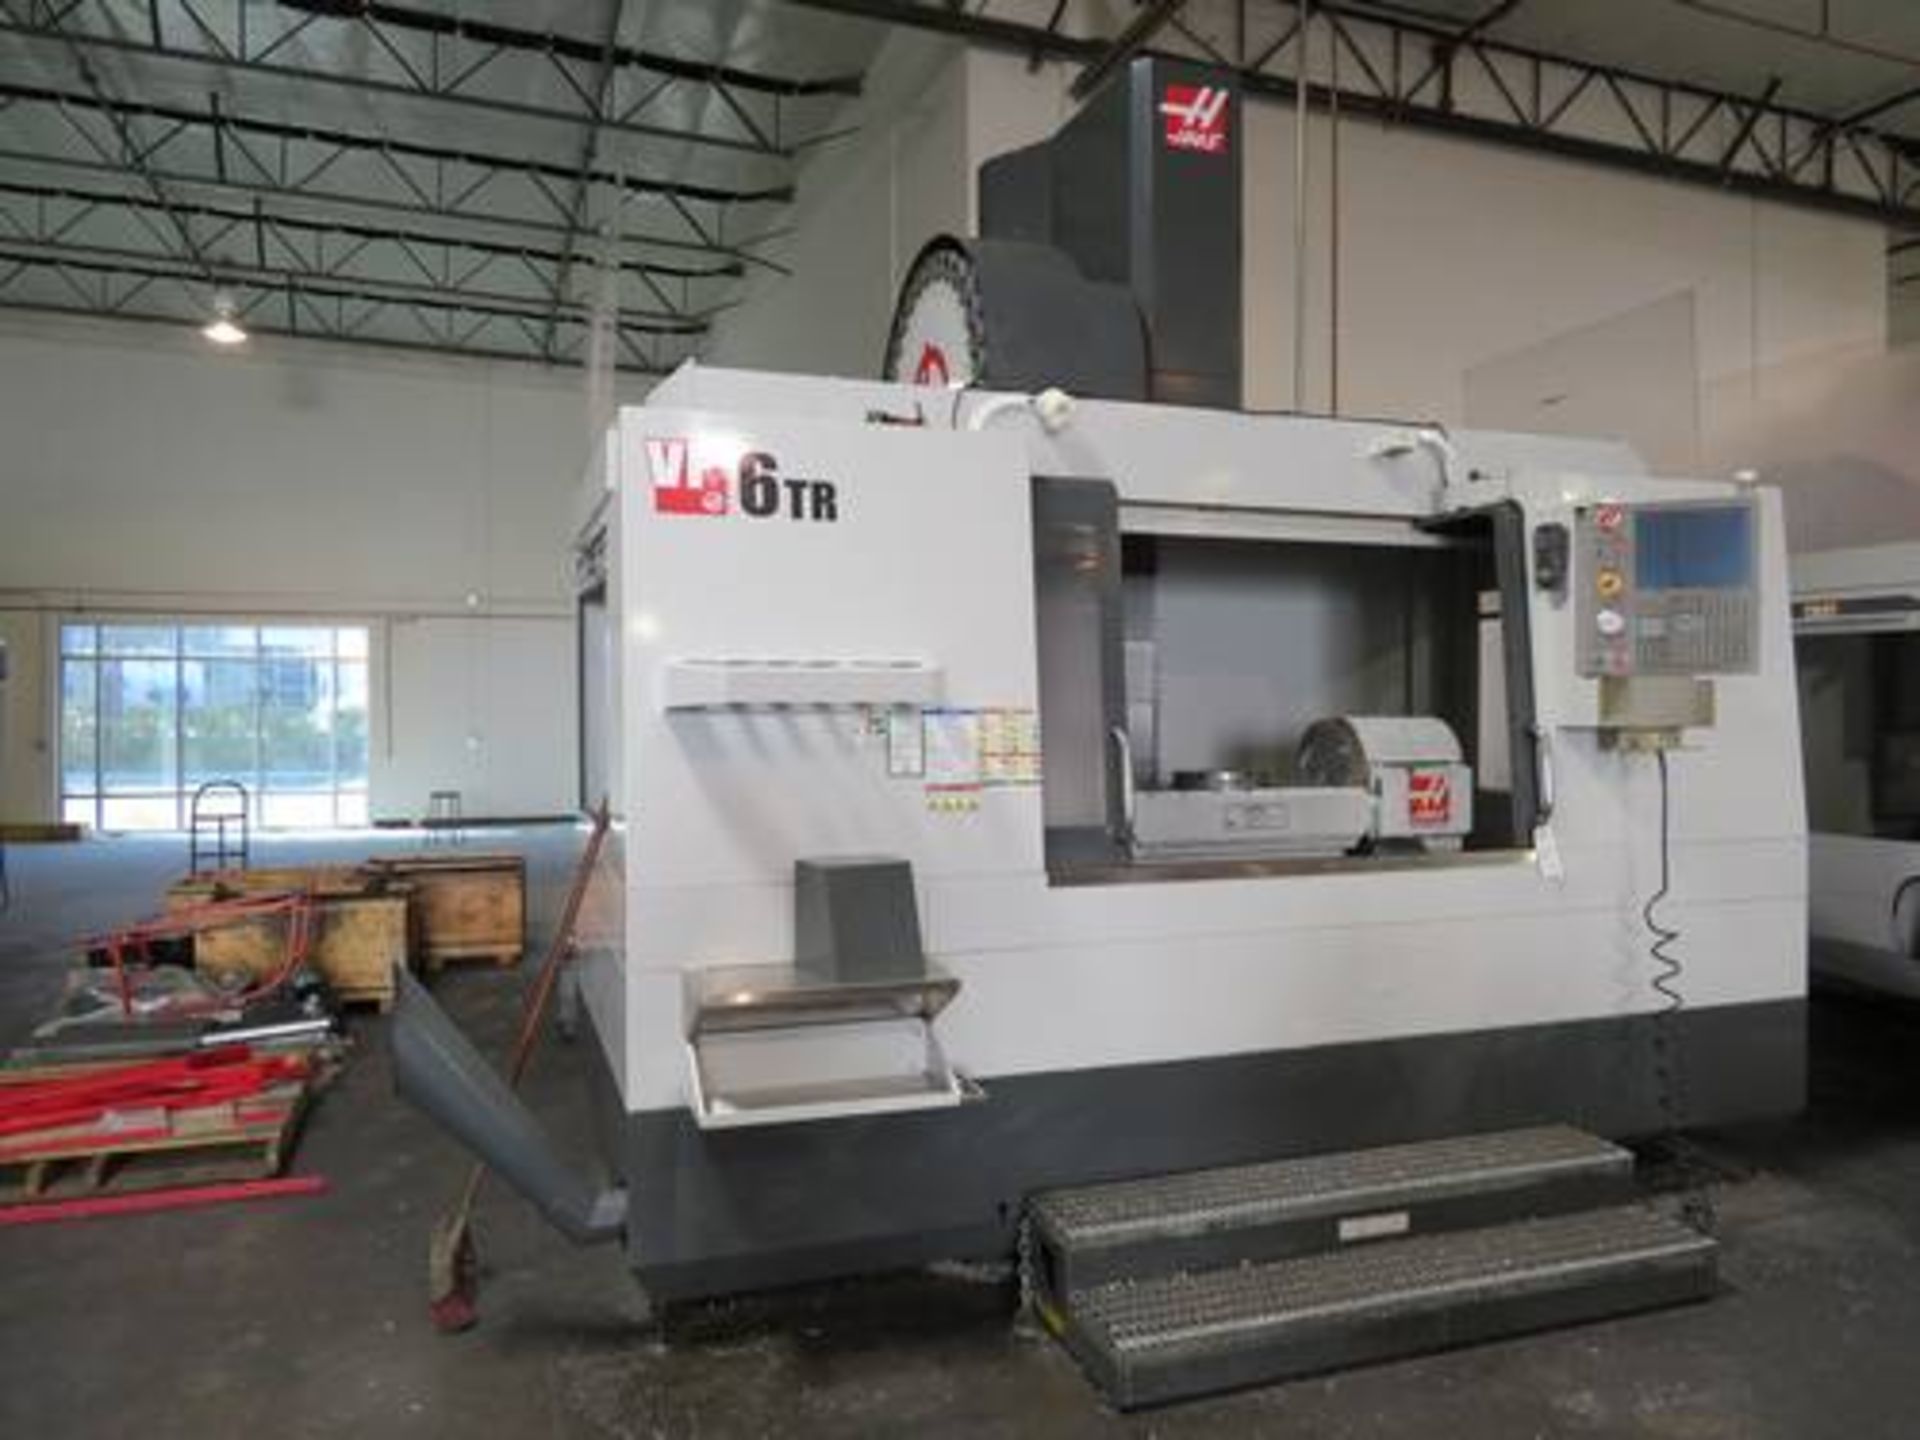 Haas TR310 5-Axis Trunion AND Haas VF6TR, 5-Axis V.M.C. Haas Control, 64" x 32" x 40" - Image 8 of 10